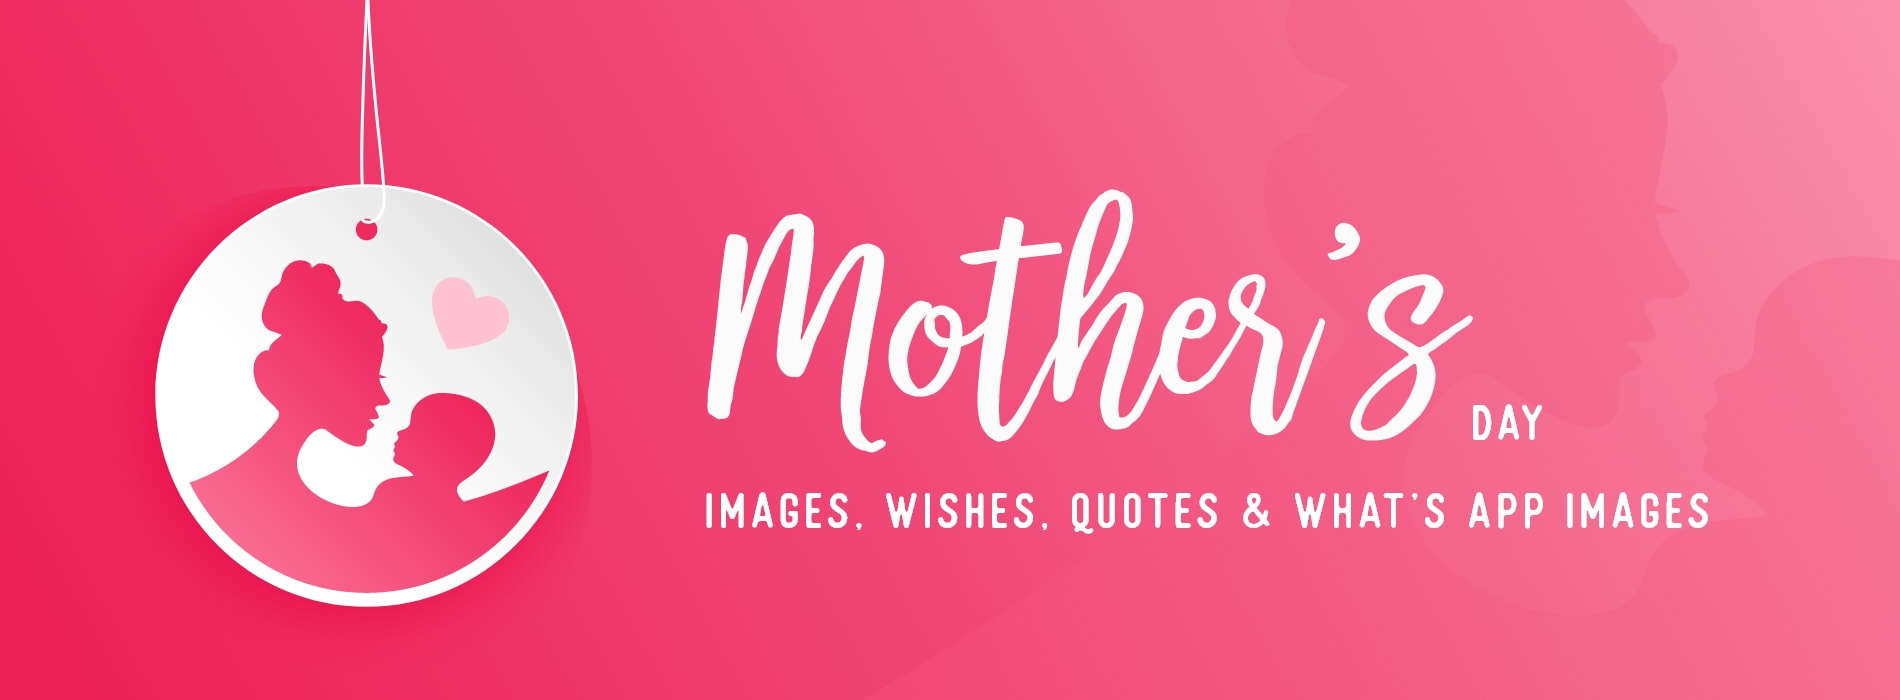 Mother's-Day-Images,-Wishes,-Quotes-&-What's-App-Images-Viraasi